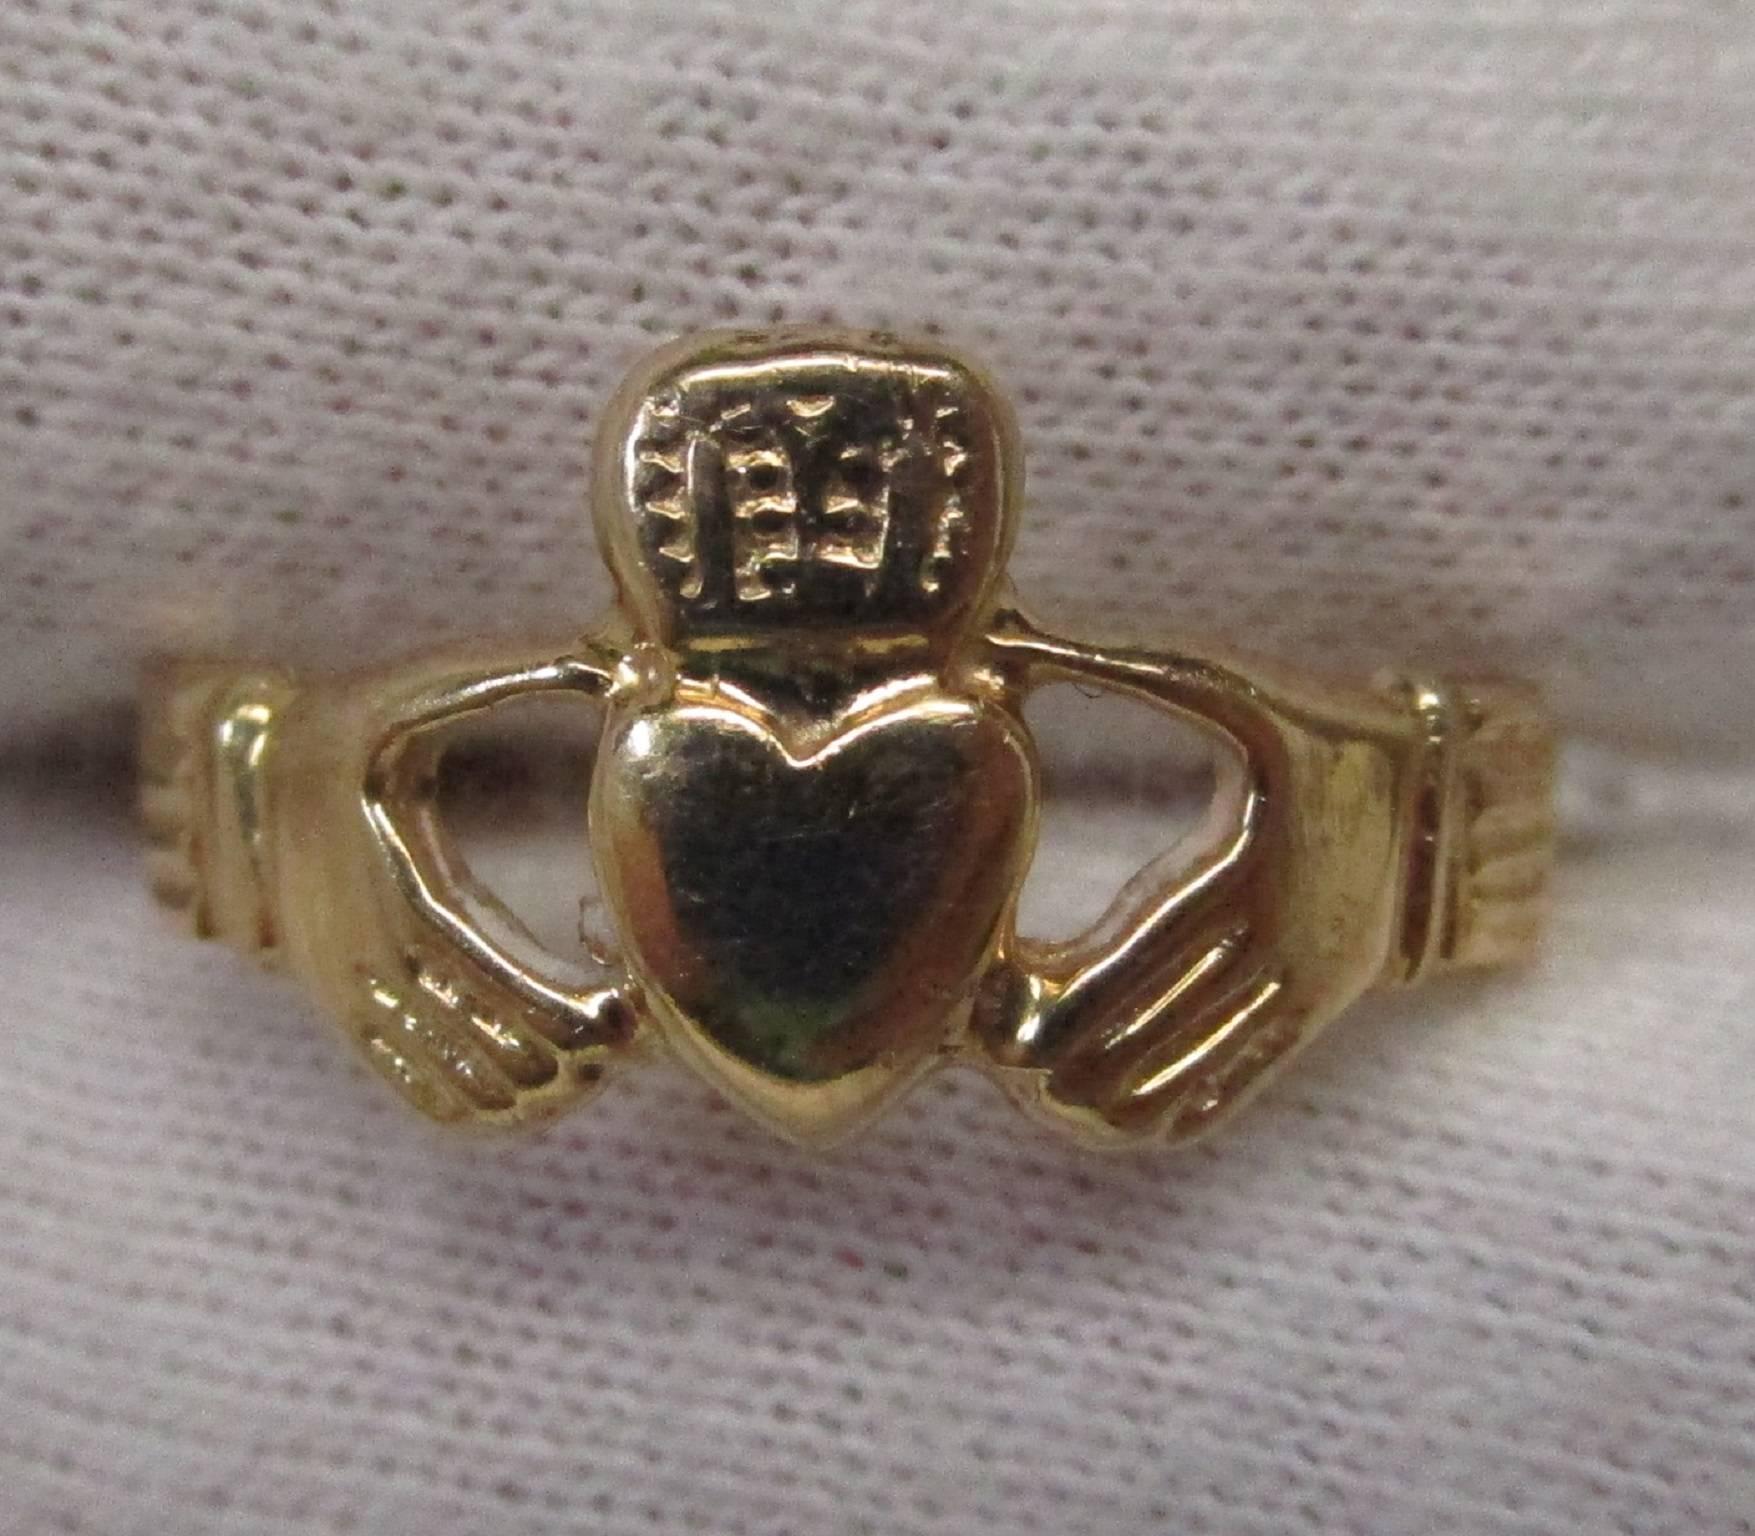 This is a 14 karat Claddagh ring. The Claddagh depicts two hands holding a heart with a crown, symbolizing friendship, loyalty and love. This would be a lovely gift for that special someone. The ring is a size 6.25.

St. John & Myers Jewelry is